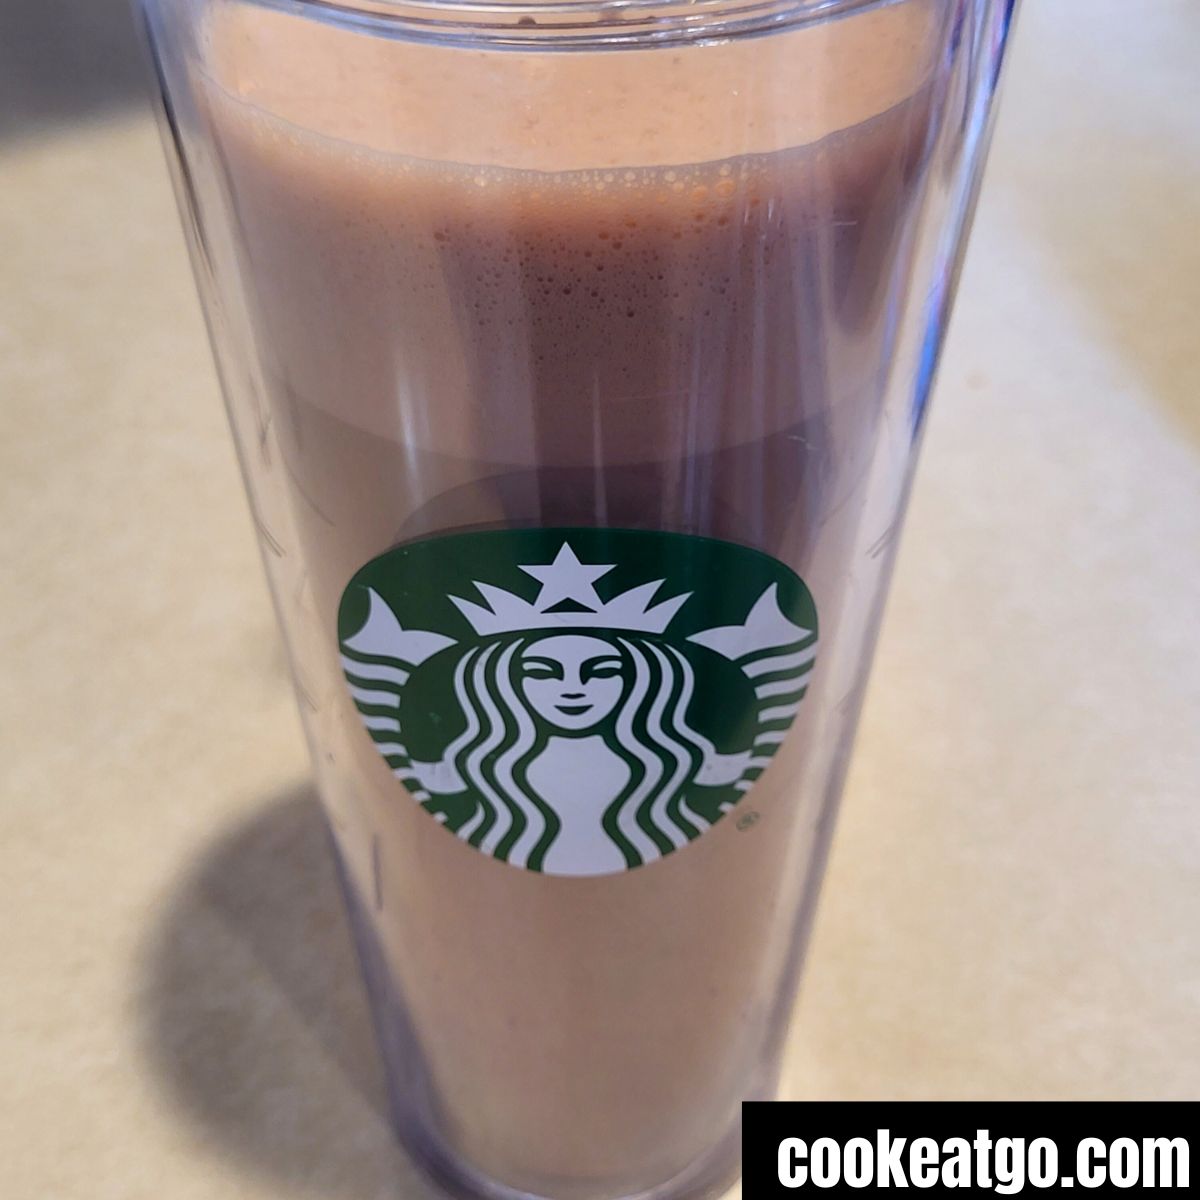 Frothed skinny mocha in clear starbucks venti cup